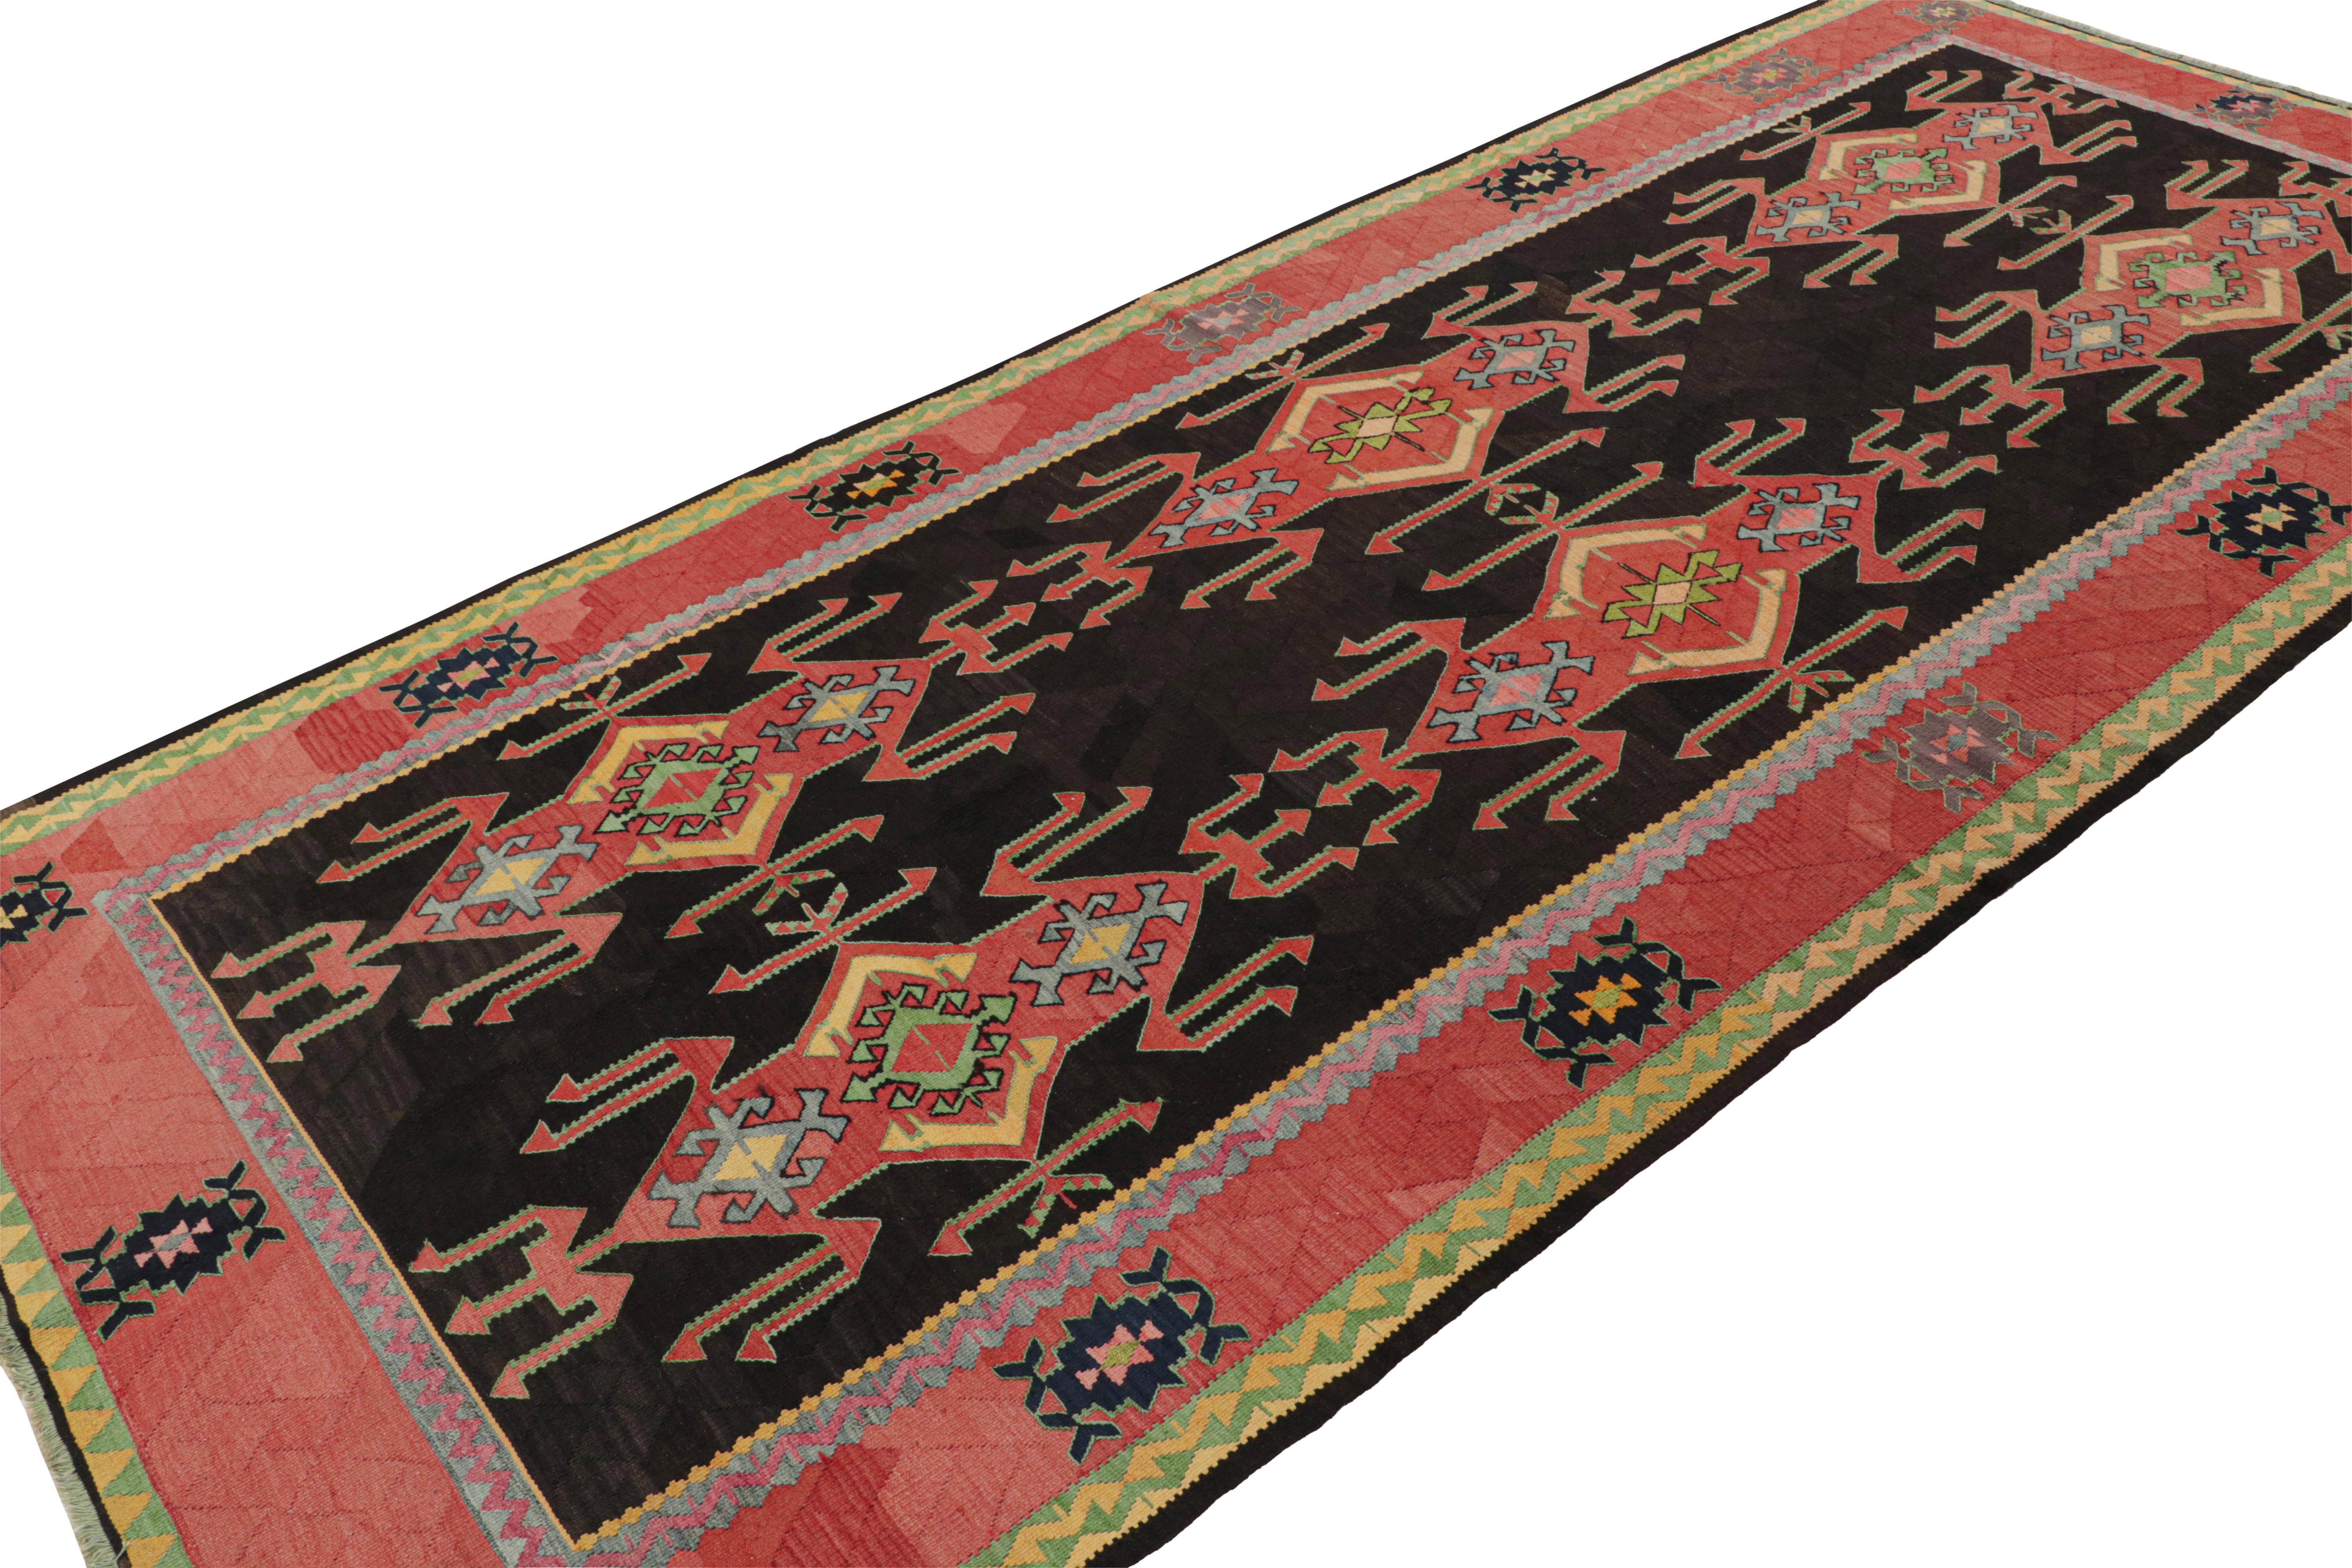 This vintage 5x11 Persian Kilim is the latest to join our Kilim & Flatweave collection. 

On the Design:

Handwoven in wool circa 1950-1960, the piece carries red patterns on a black field. The gorgeous tribal piece is fabulously unique in its scale